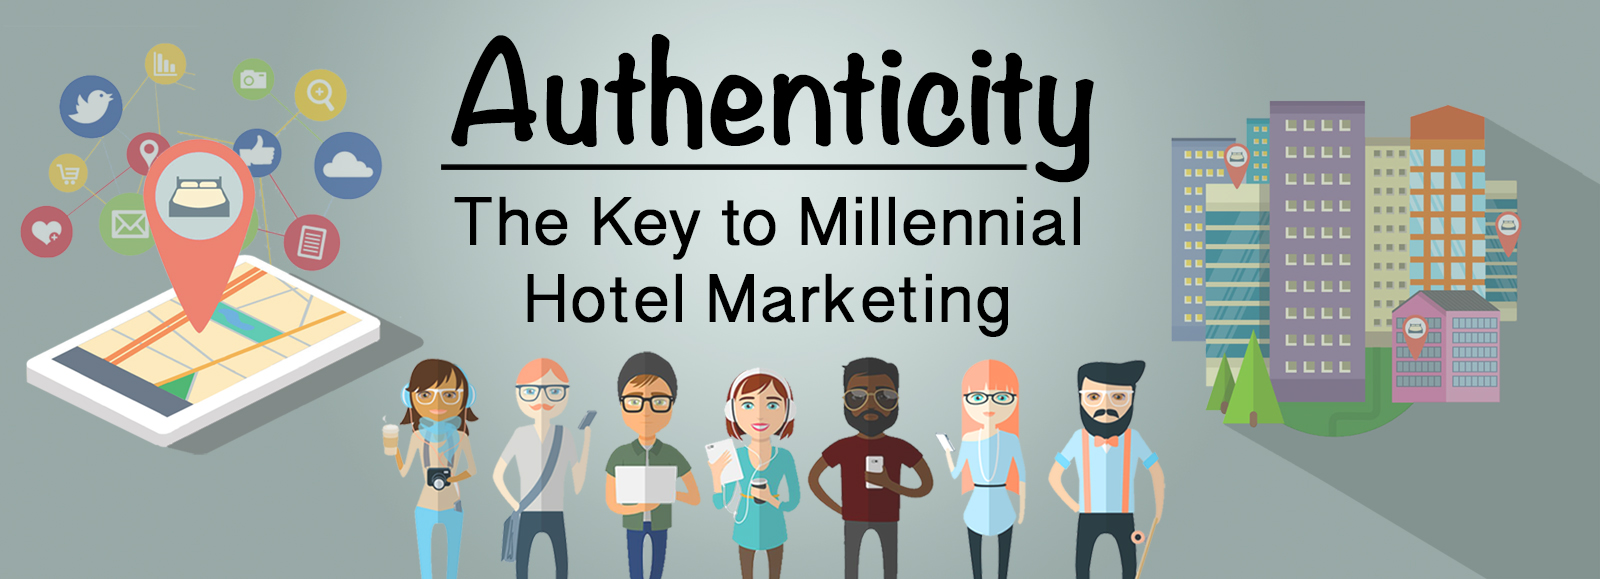 Authenticity - The Key to Millennial Hotel Marketing